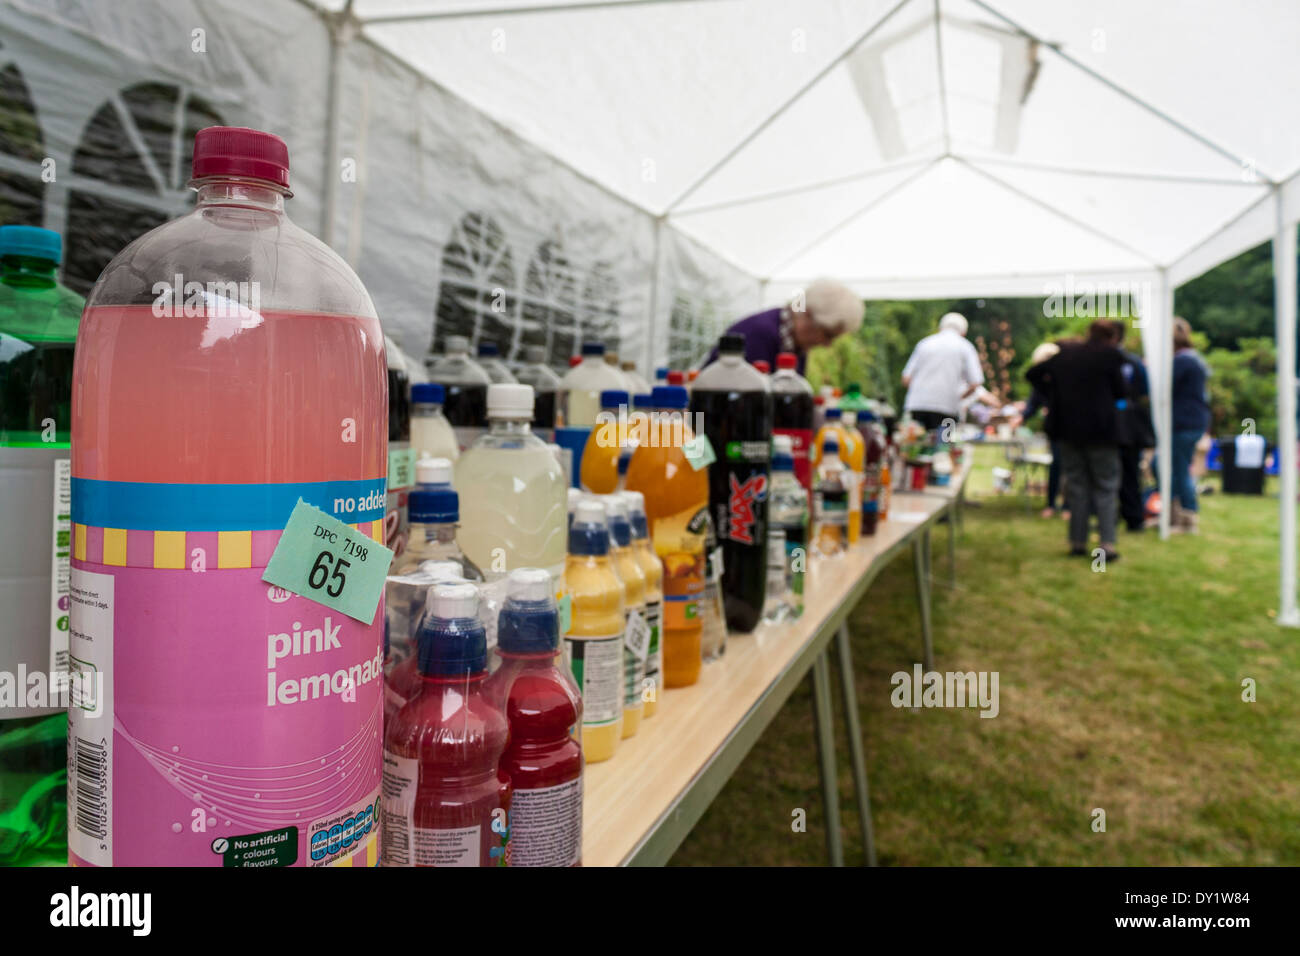 Tombola stall at an English church summer fete. Soft drinks as prizes. Stock Photo